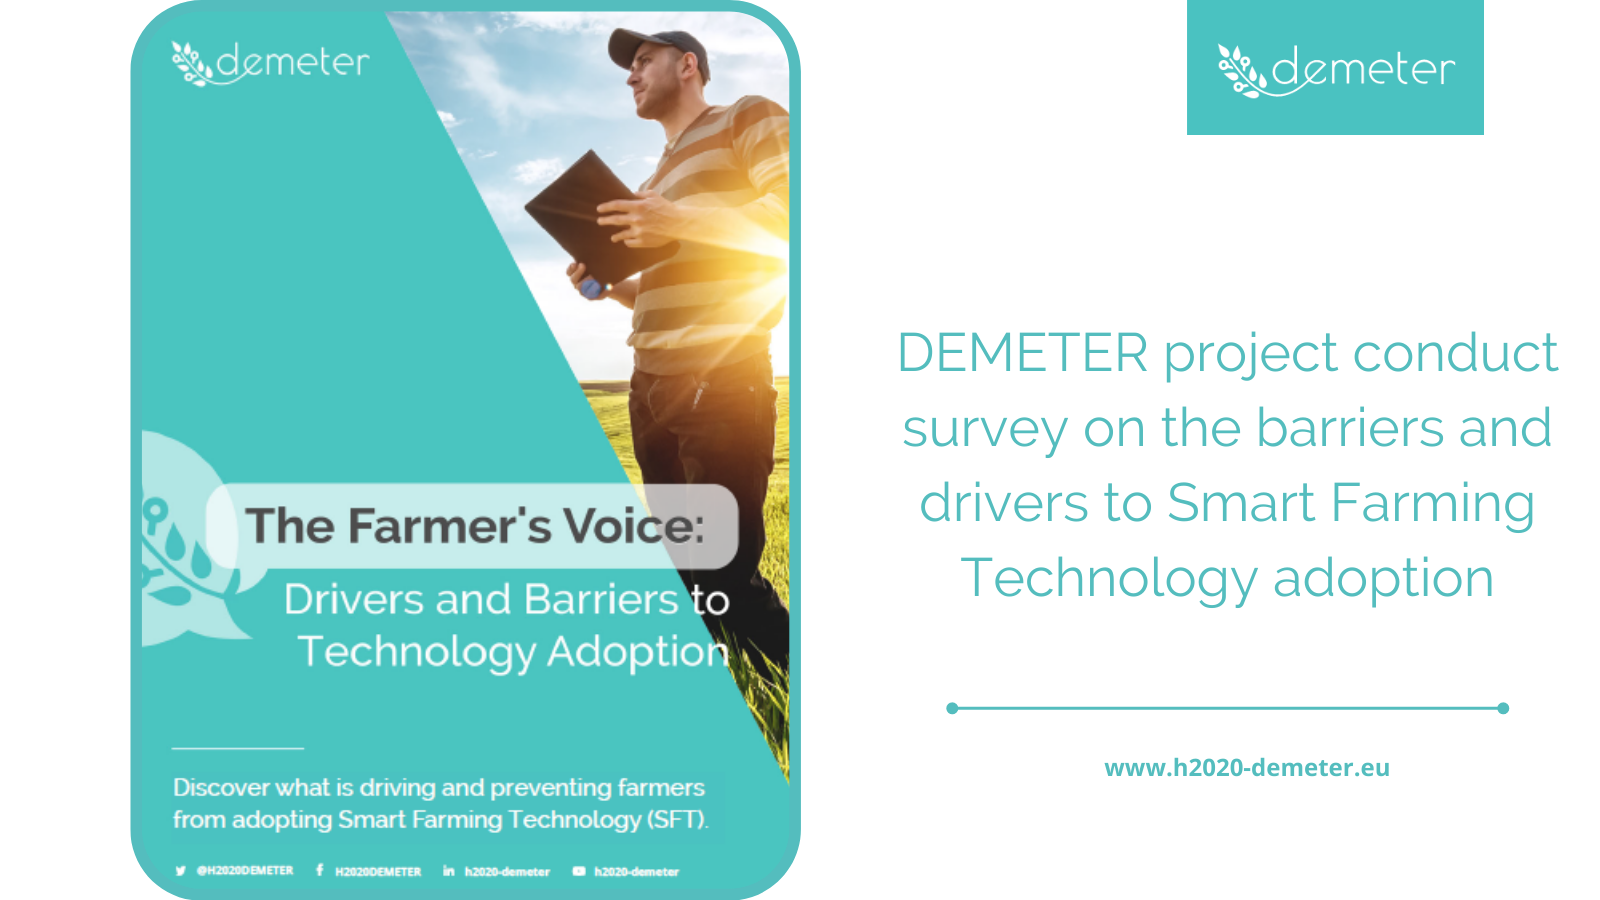 Out now, the full report from the DEMETER survey on the barriers and drivers to Smart Farming Technology adoption